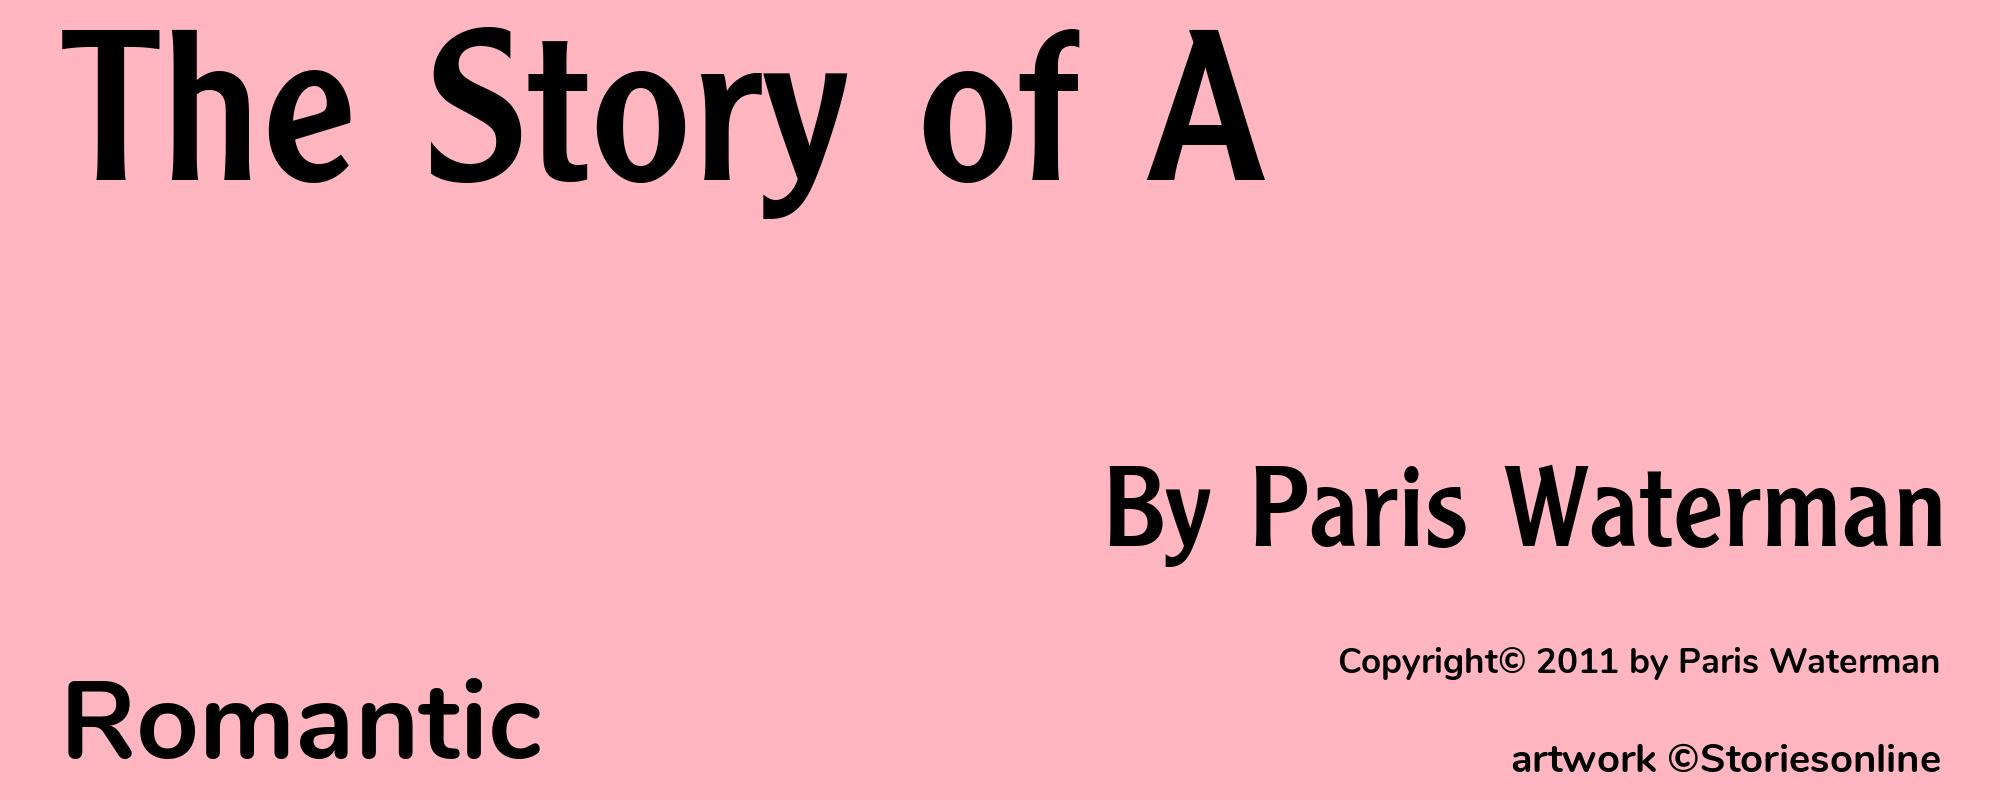 The Story of A - Cover